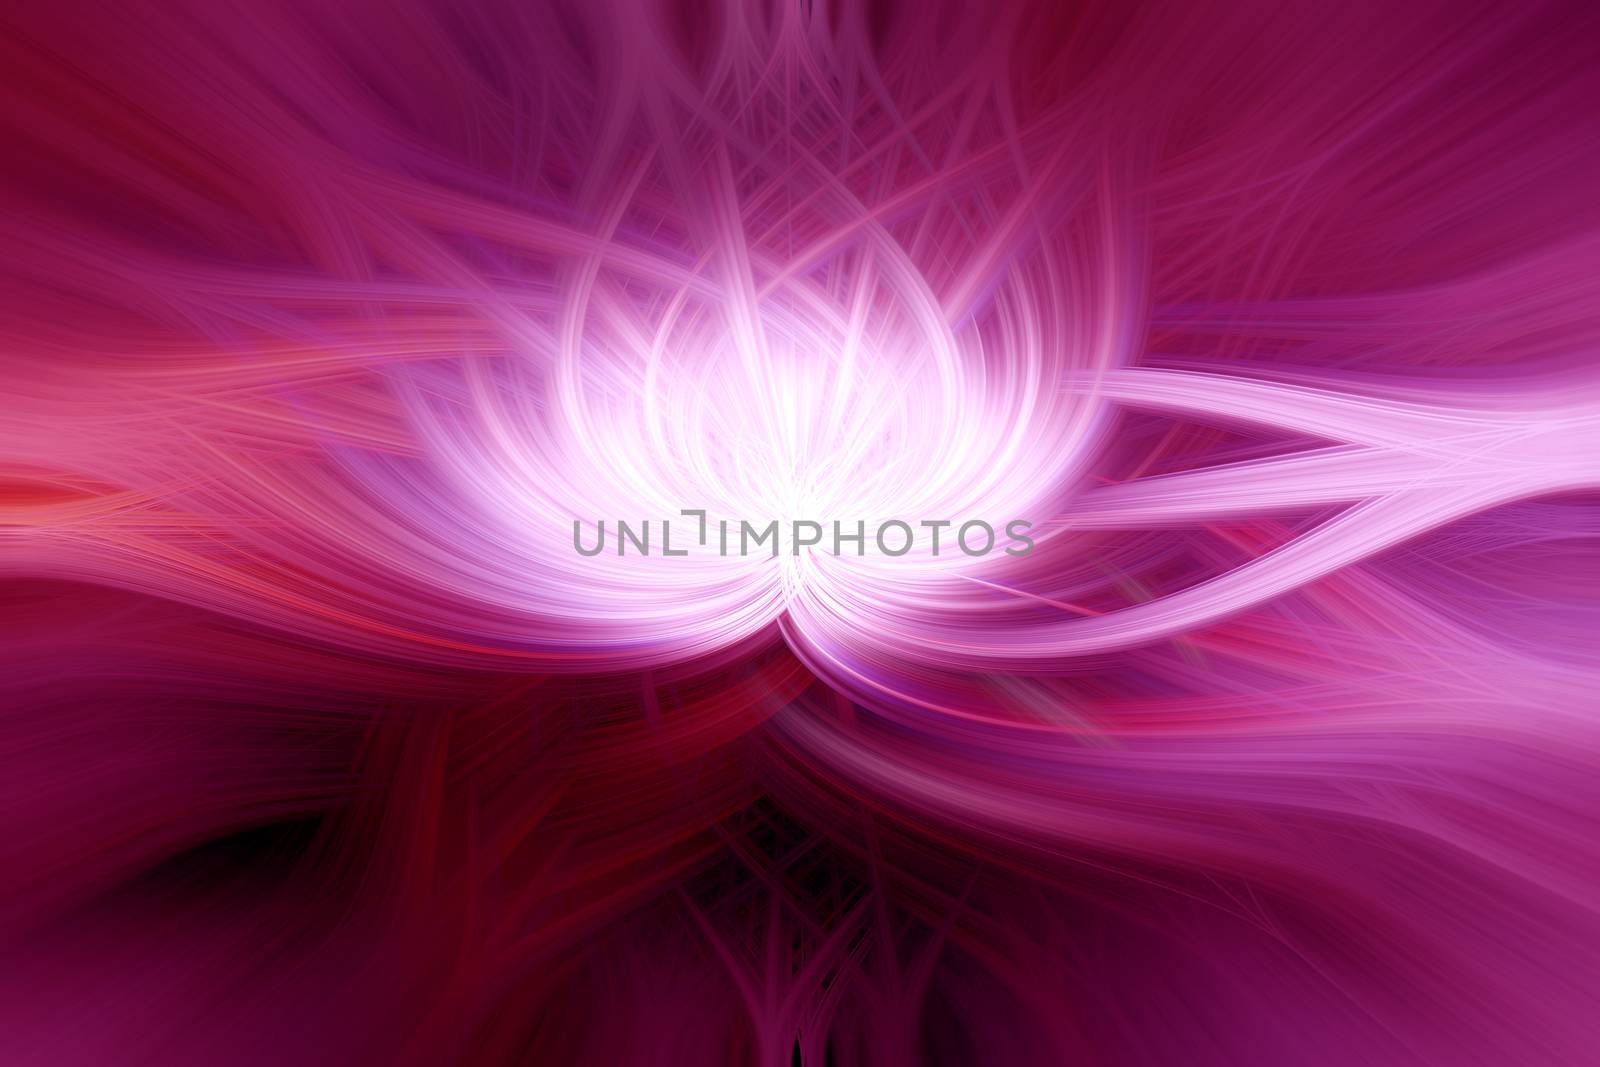 Beautiful abstract intertwined 3d fibers forming a shape of a flower or flame. Purple, red and pink colors. Illustration.